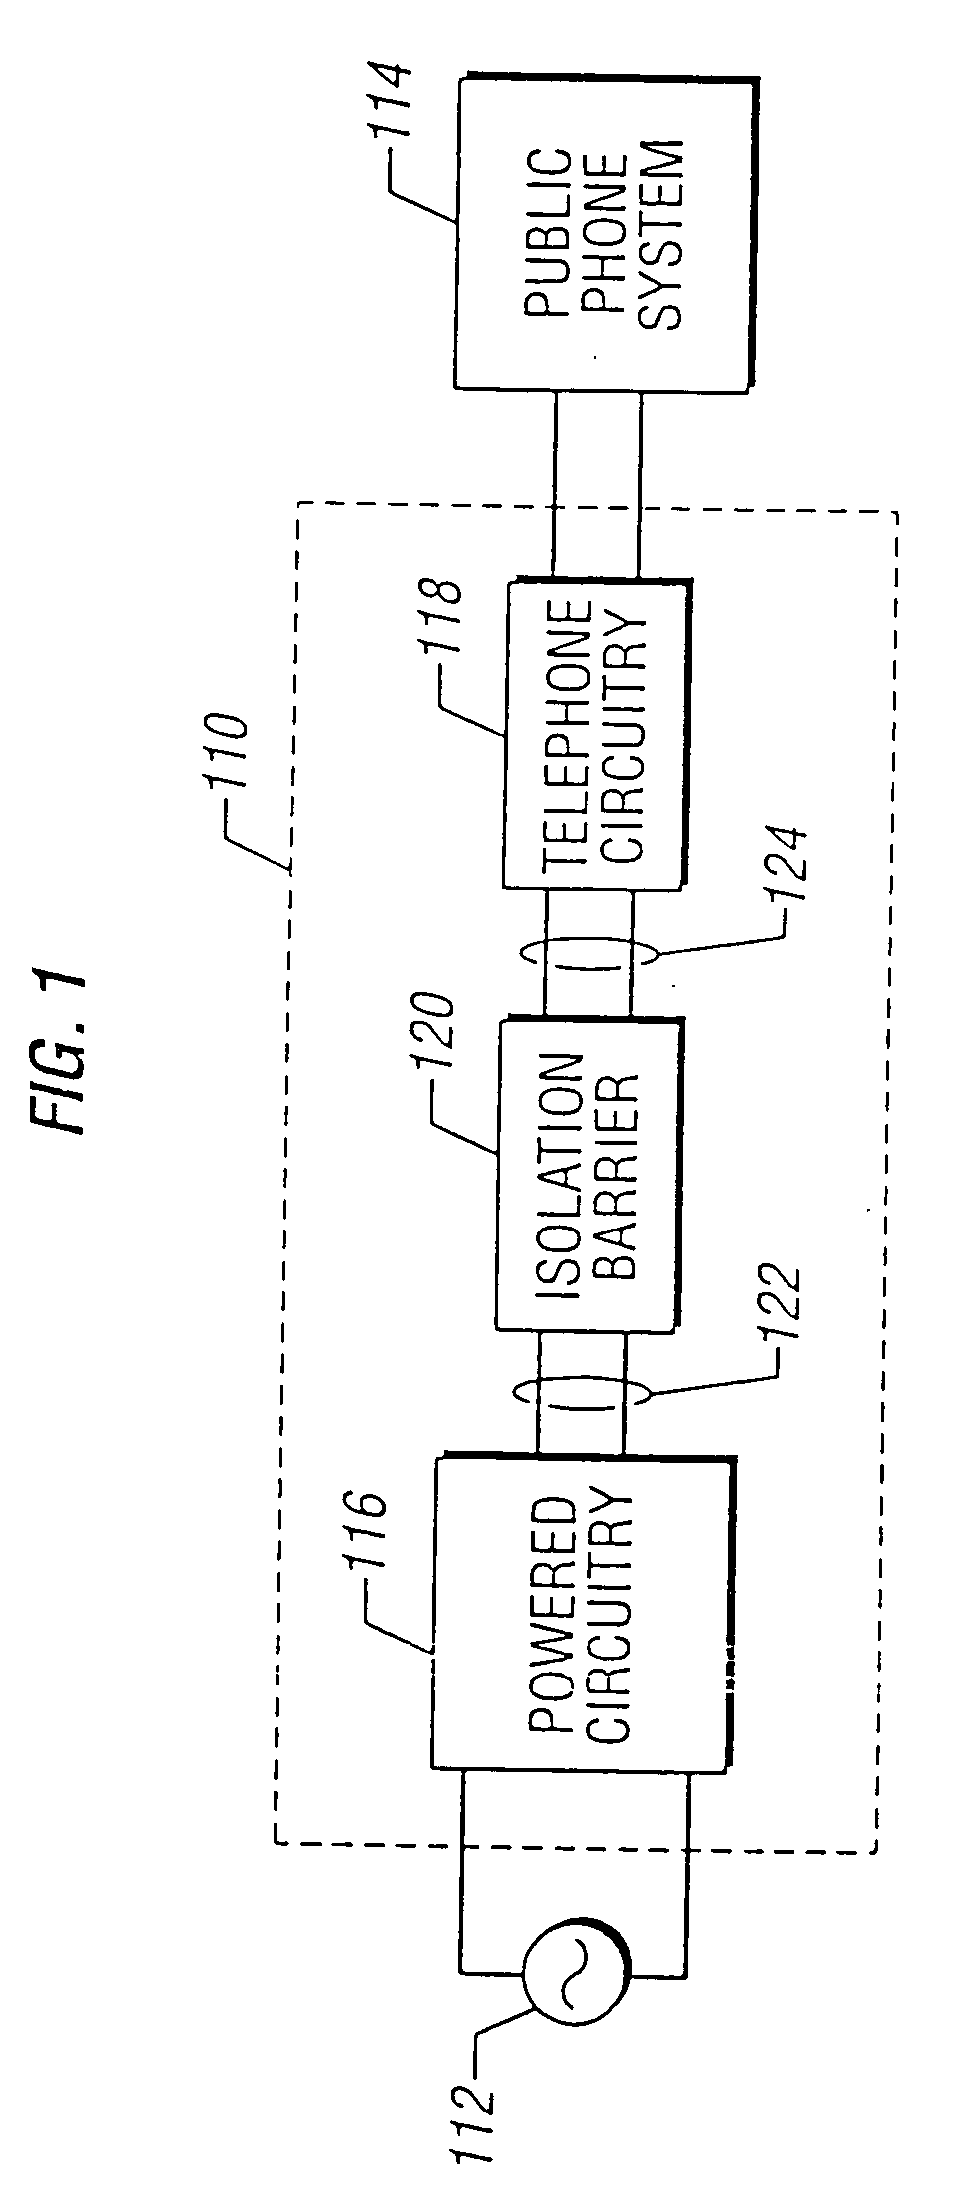 Direct digital access arrangement circuitry and method for connecting to phone lines